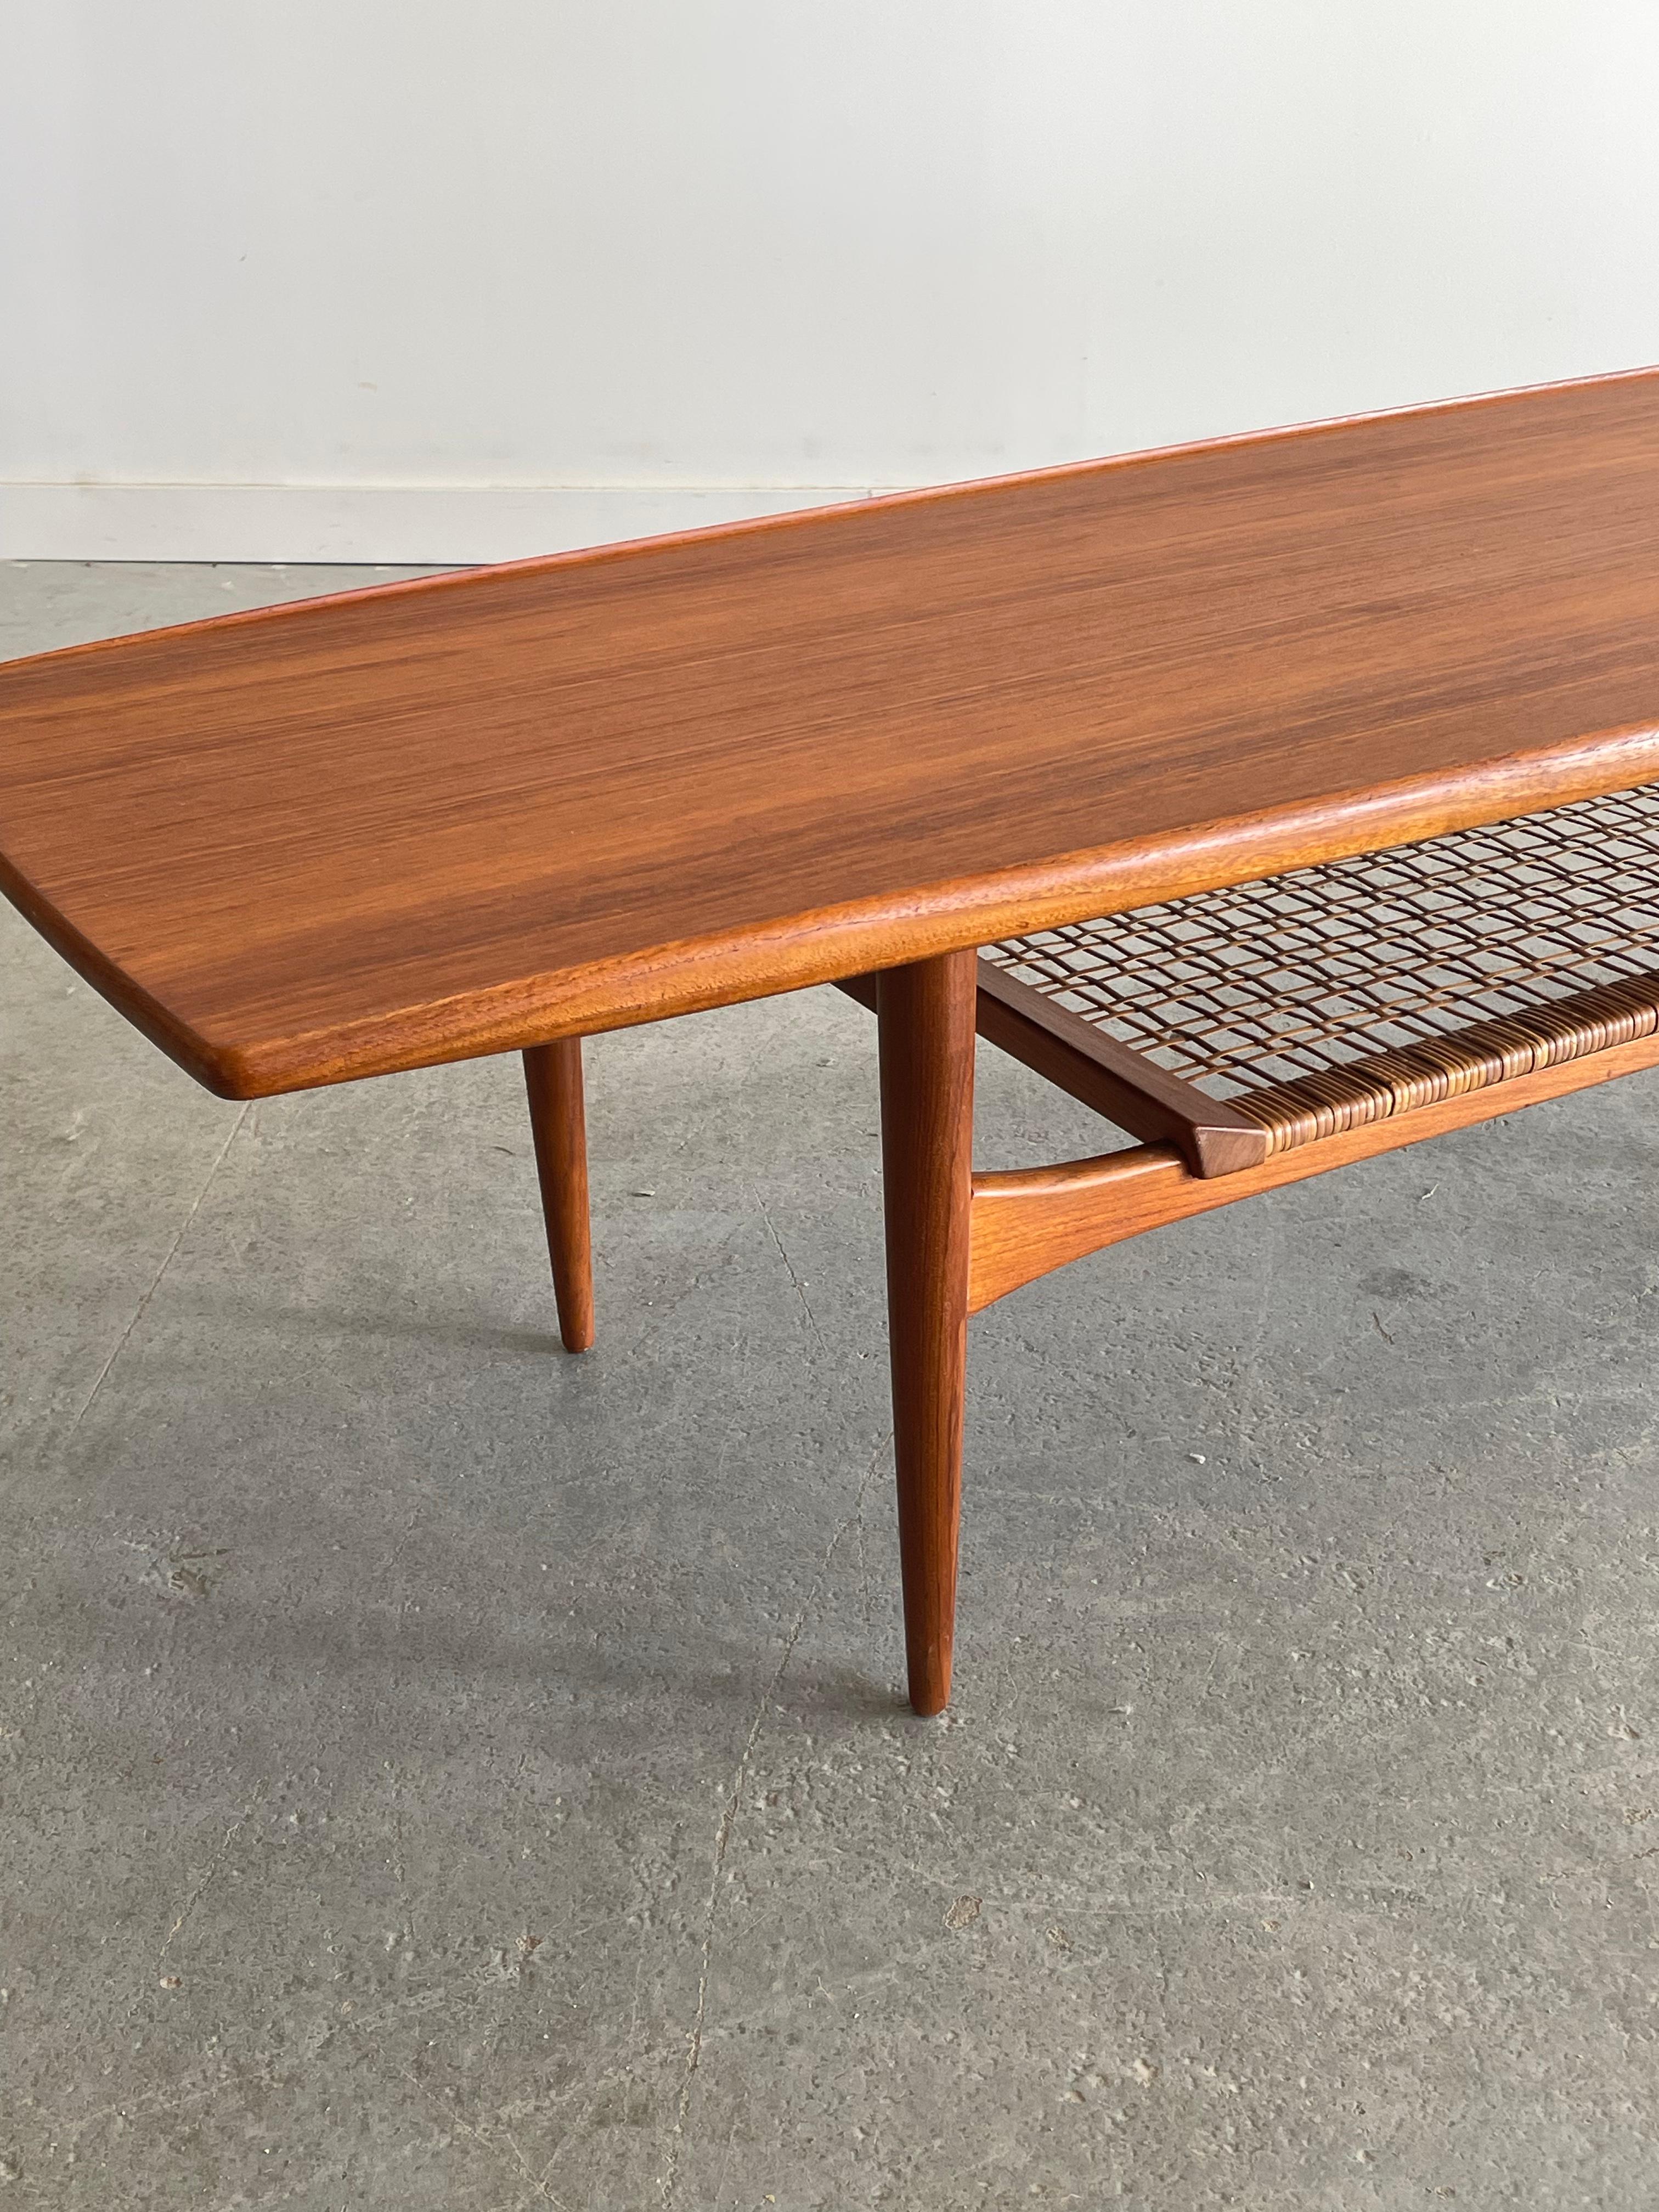 Kristiansen & Thomassen Teak and Cane Coffee Table  In Good Condition For Sale In Winnipeg, MB